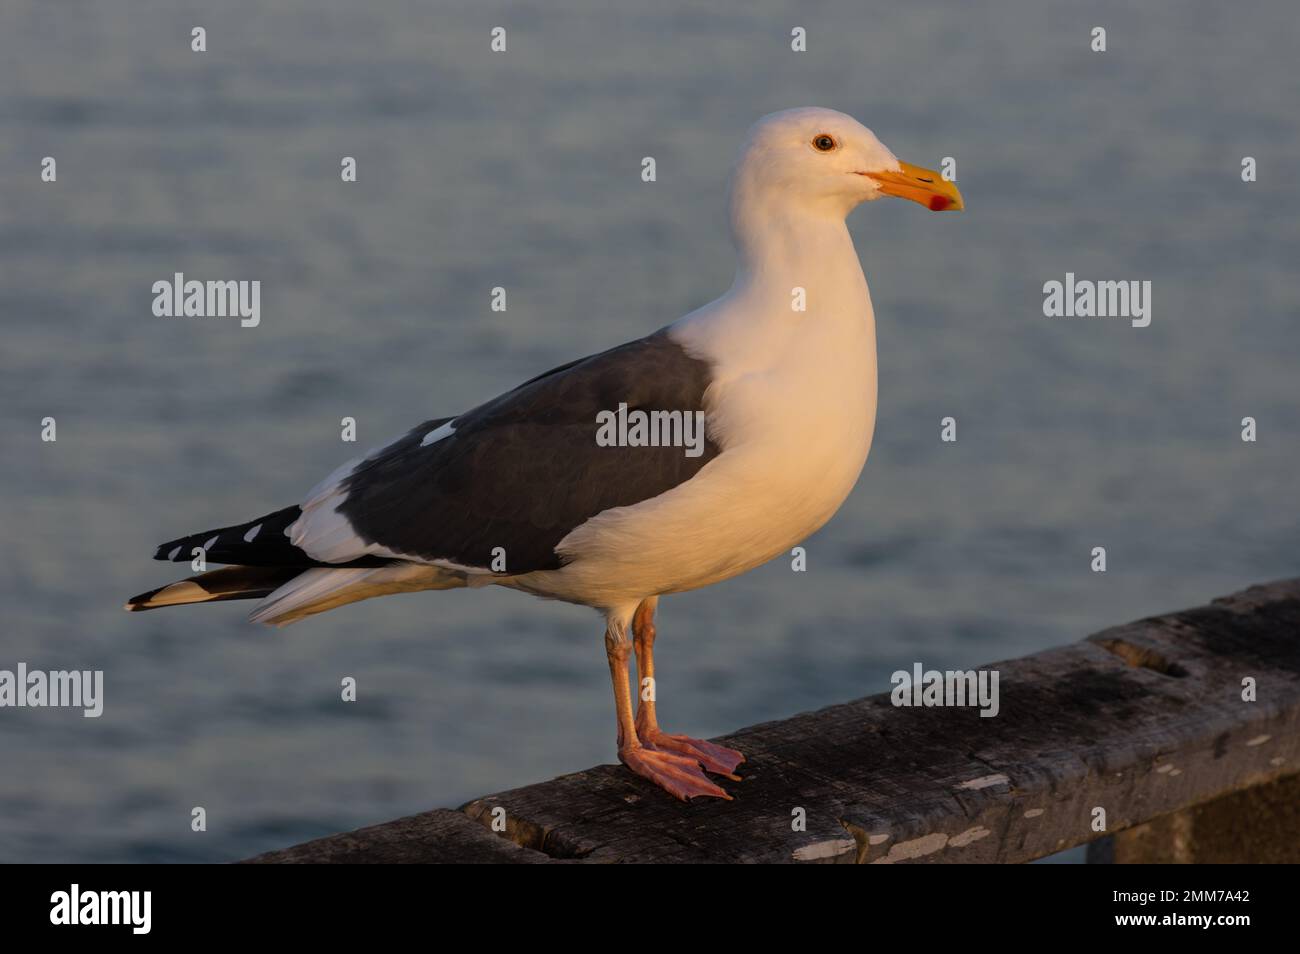 Seagull portrait shown at the Port of Los Angeles in Southern California at sunset. Stock Photo